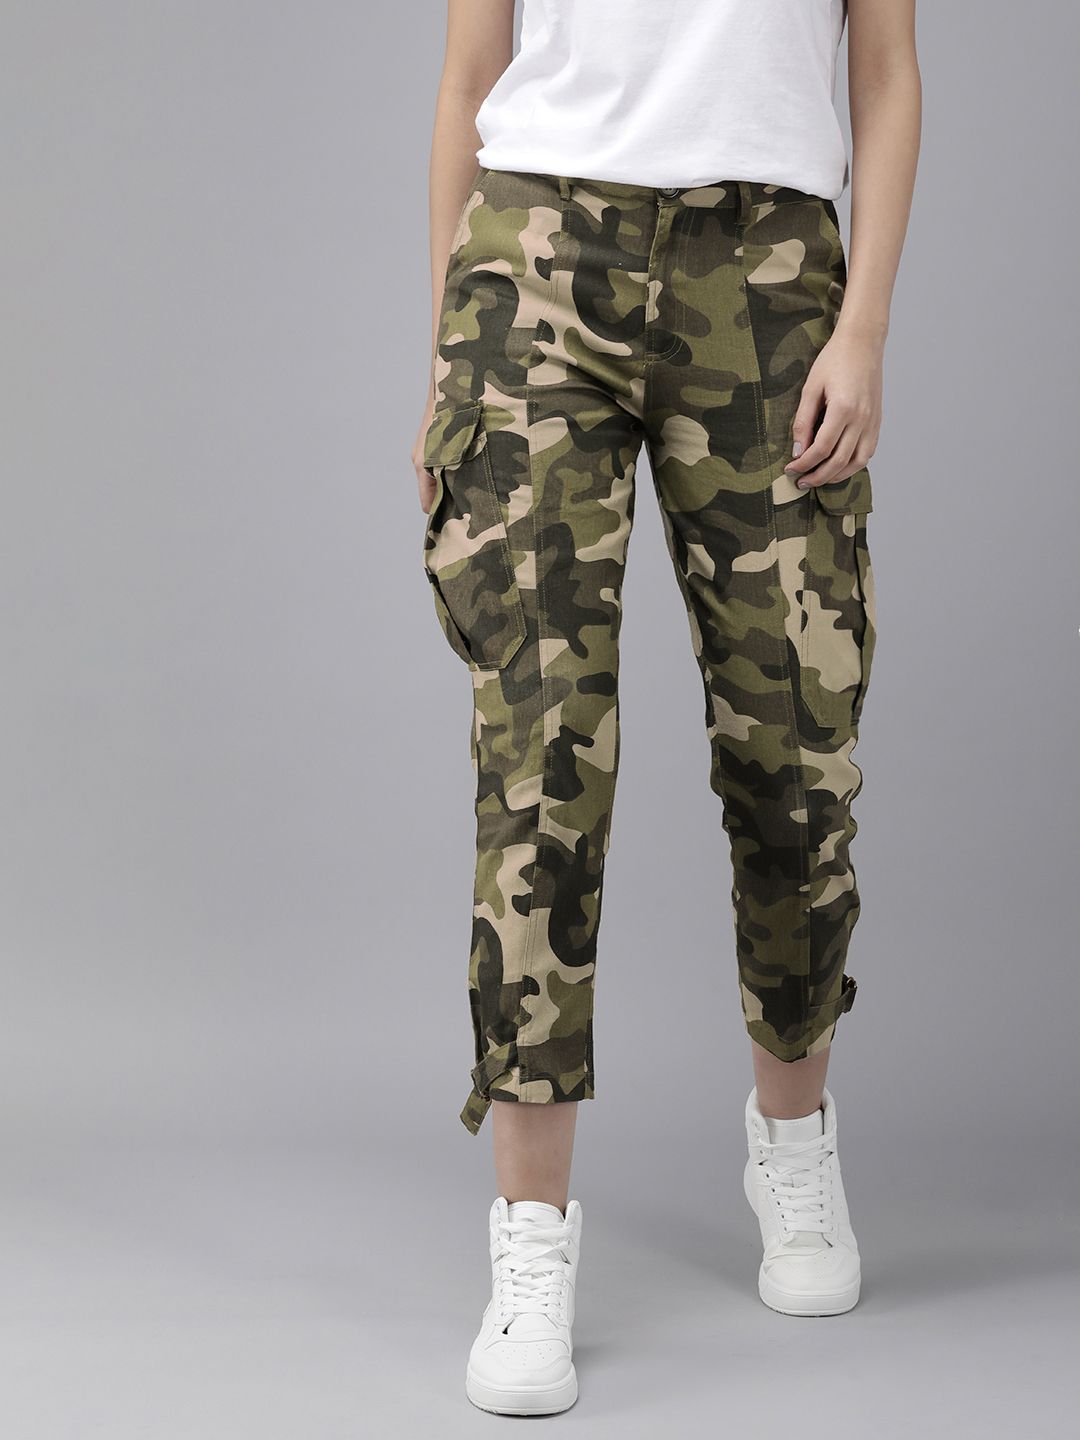 The Roadster Life Co. Women Pure Cotton Camouflage Printed Cargos Price in India